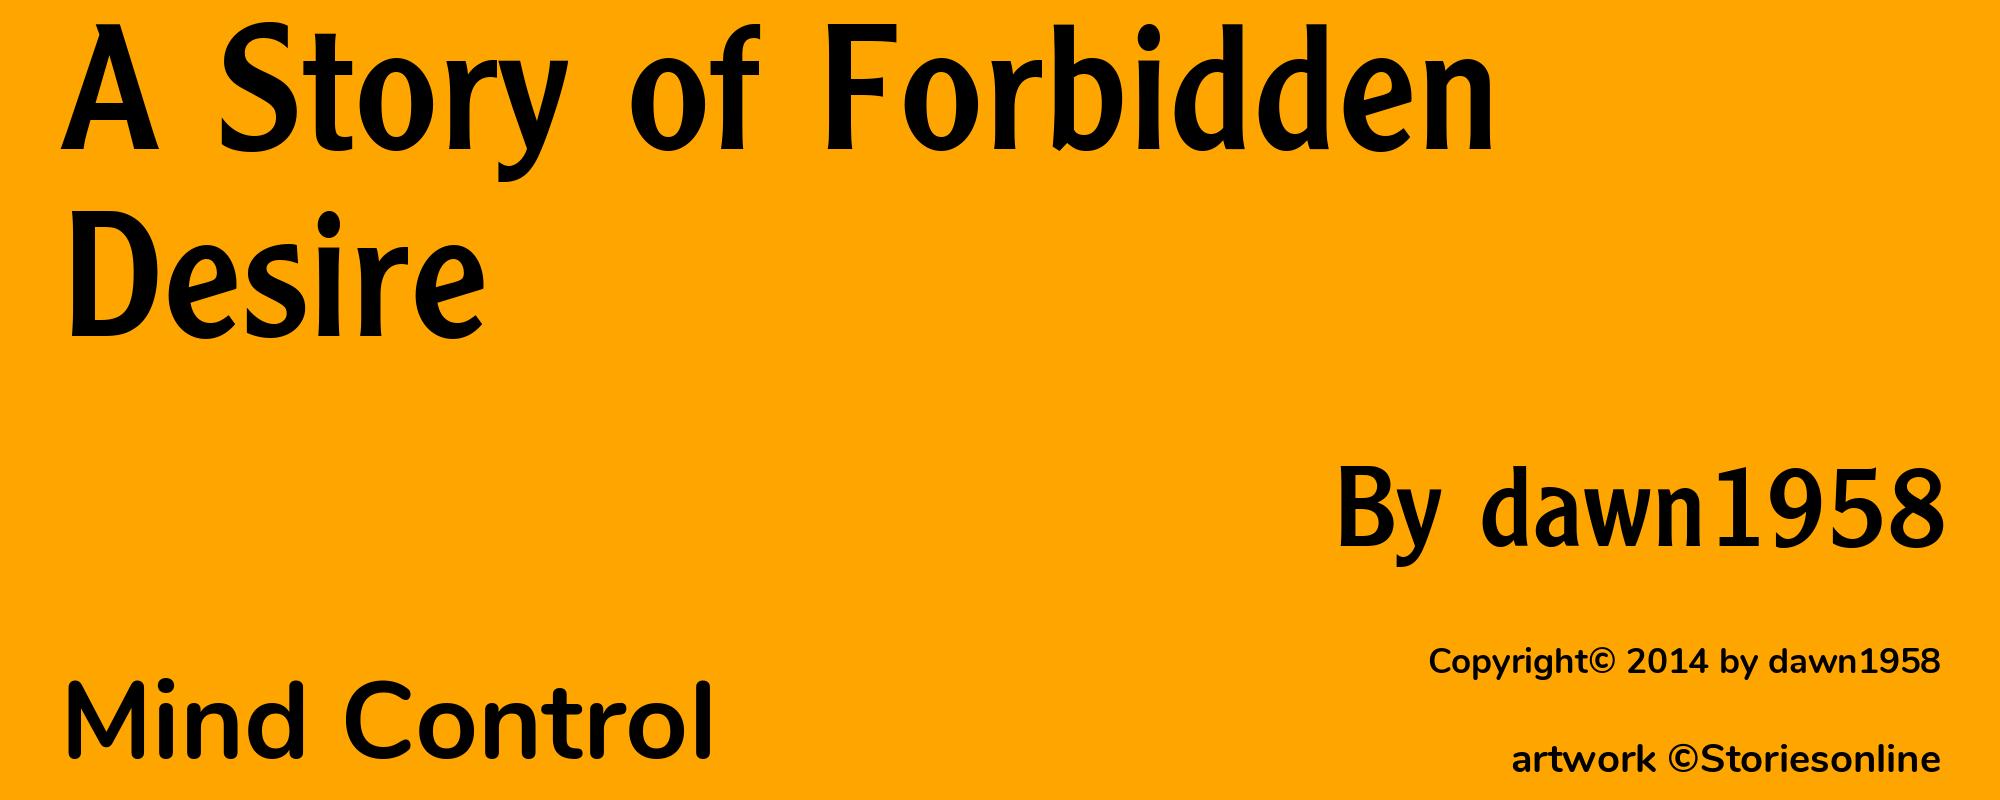 A Story of Forbidden Desire - Cover